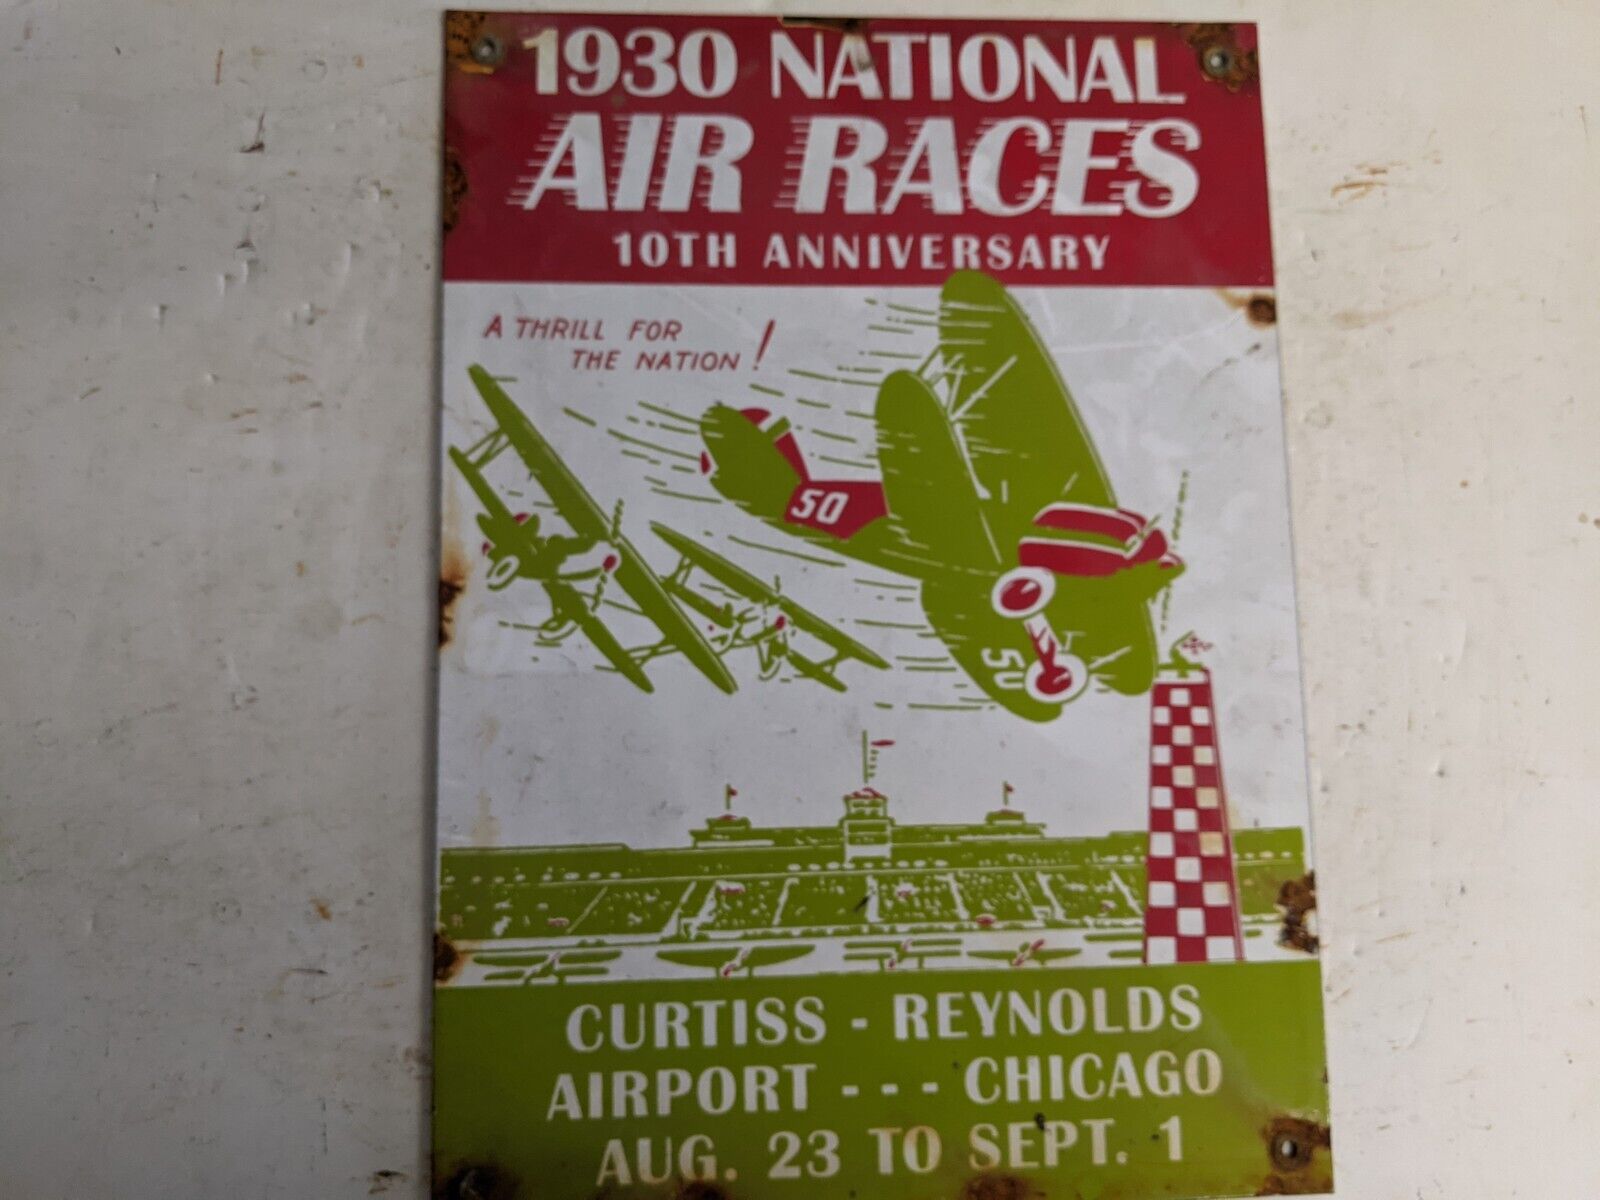 OLD VINTAGE 1930 NATIONAL AIR RACES PORCELAIN AIRPORT AIRPLANE SIGN CHICAGO